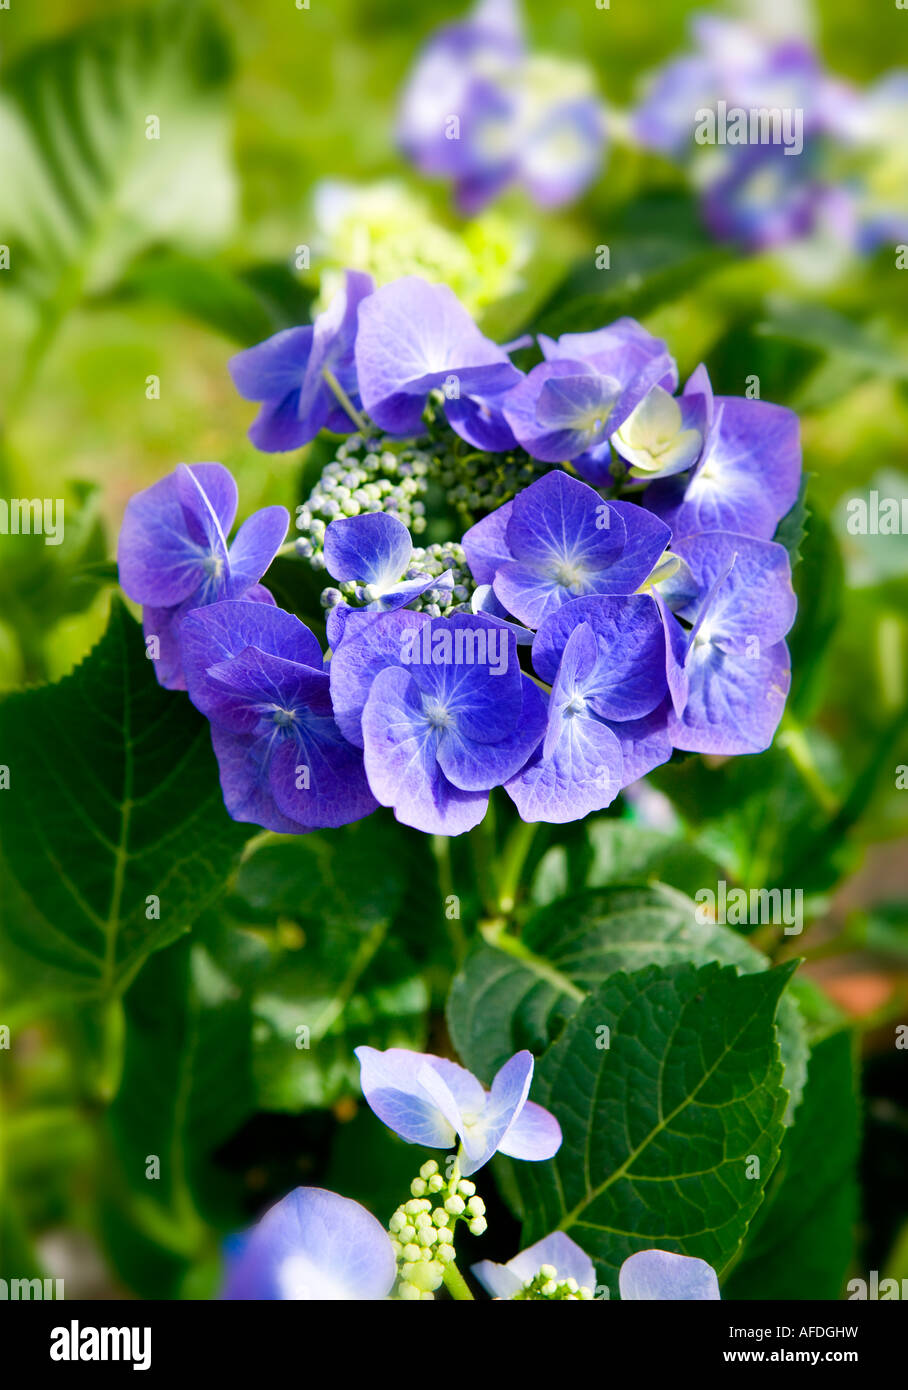 Close up shot of a blue flowering Hydrangea Stock Photo